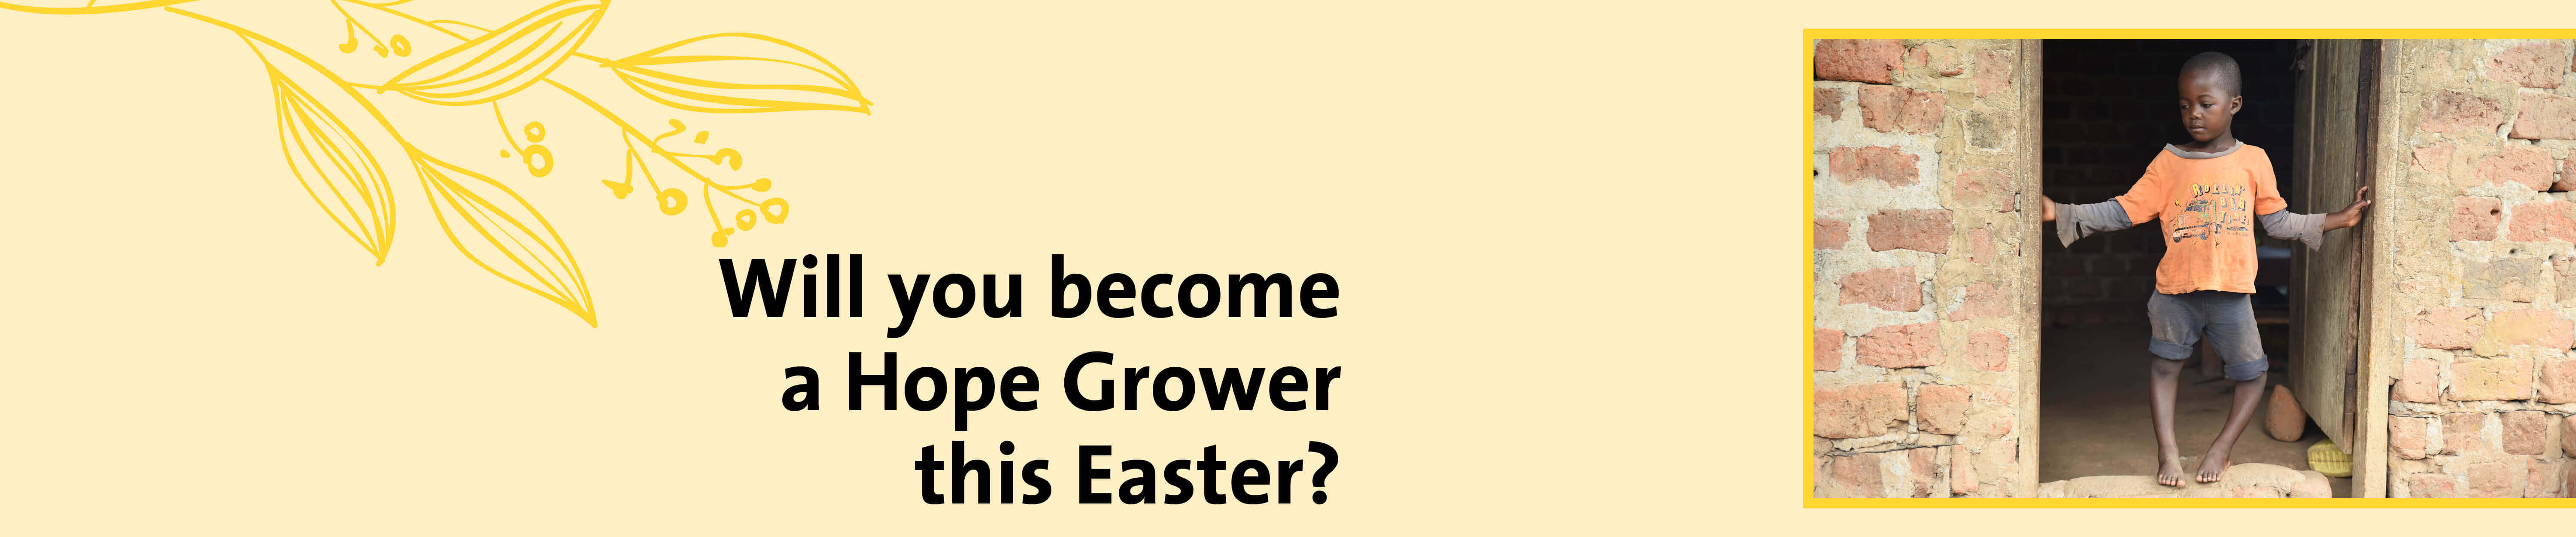 Will you become a Hope Grower this Easter?